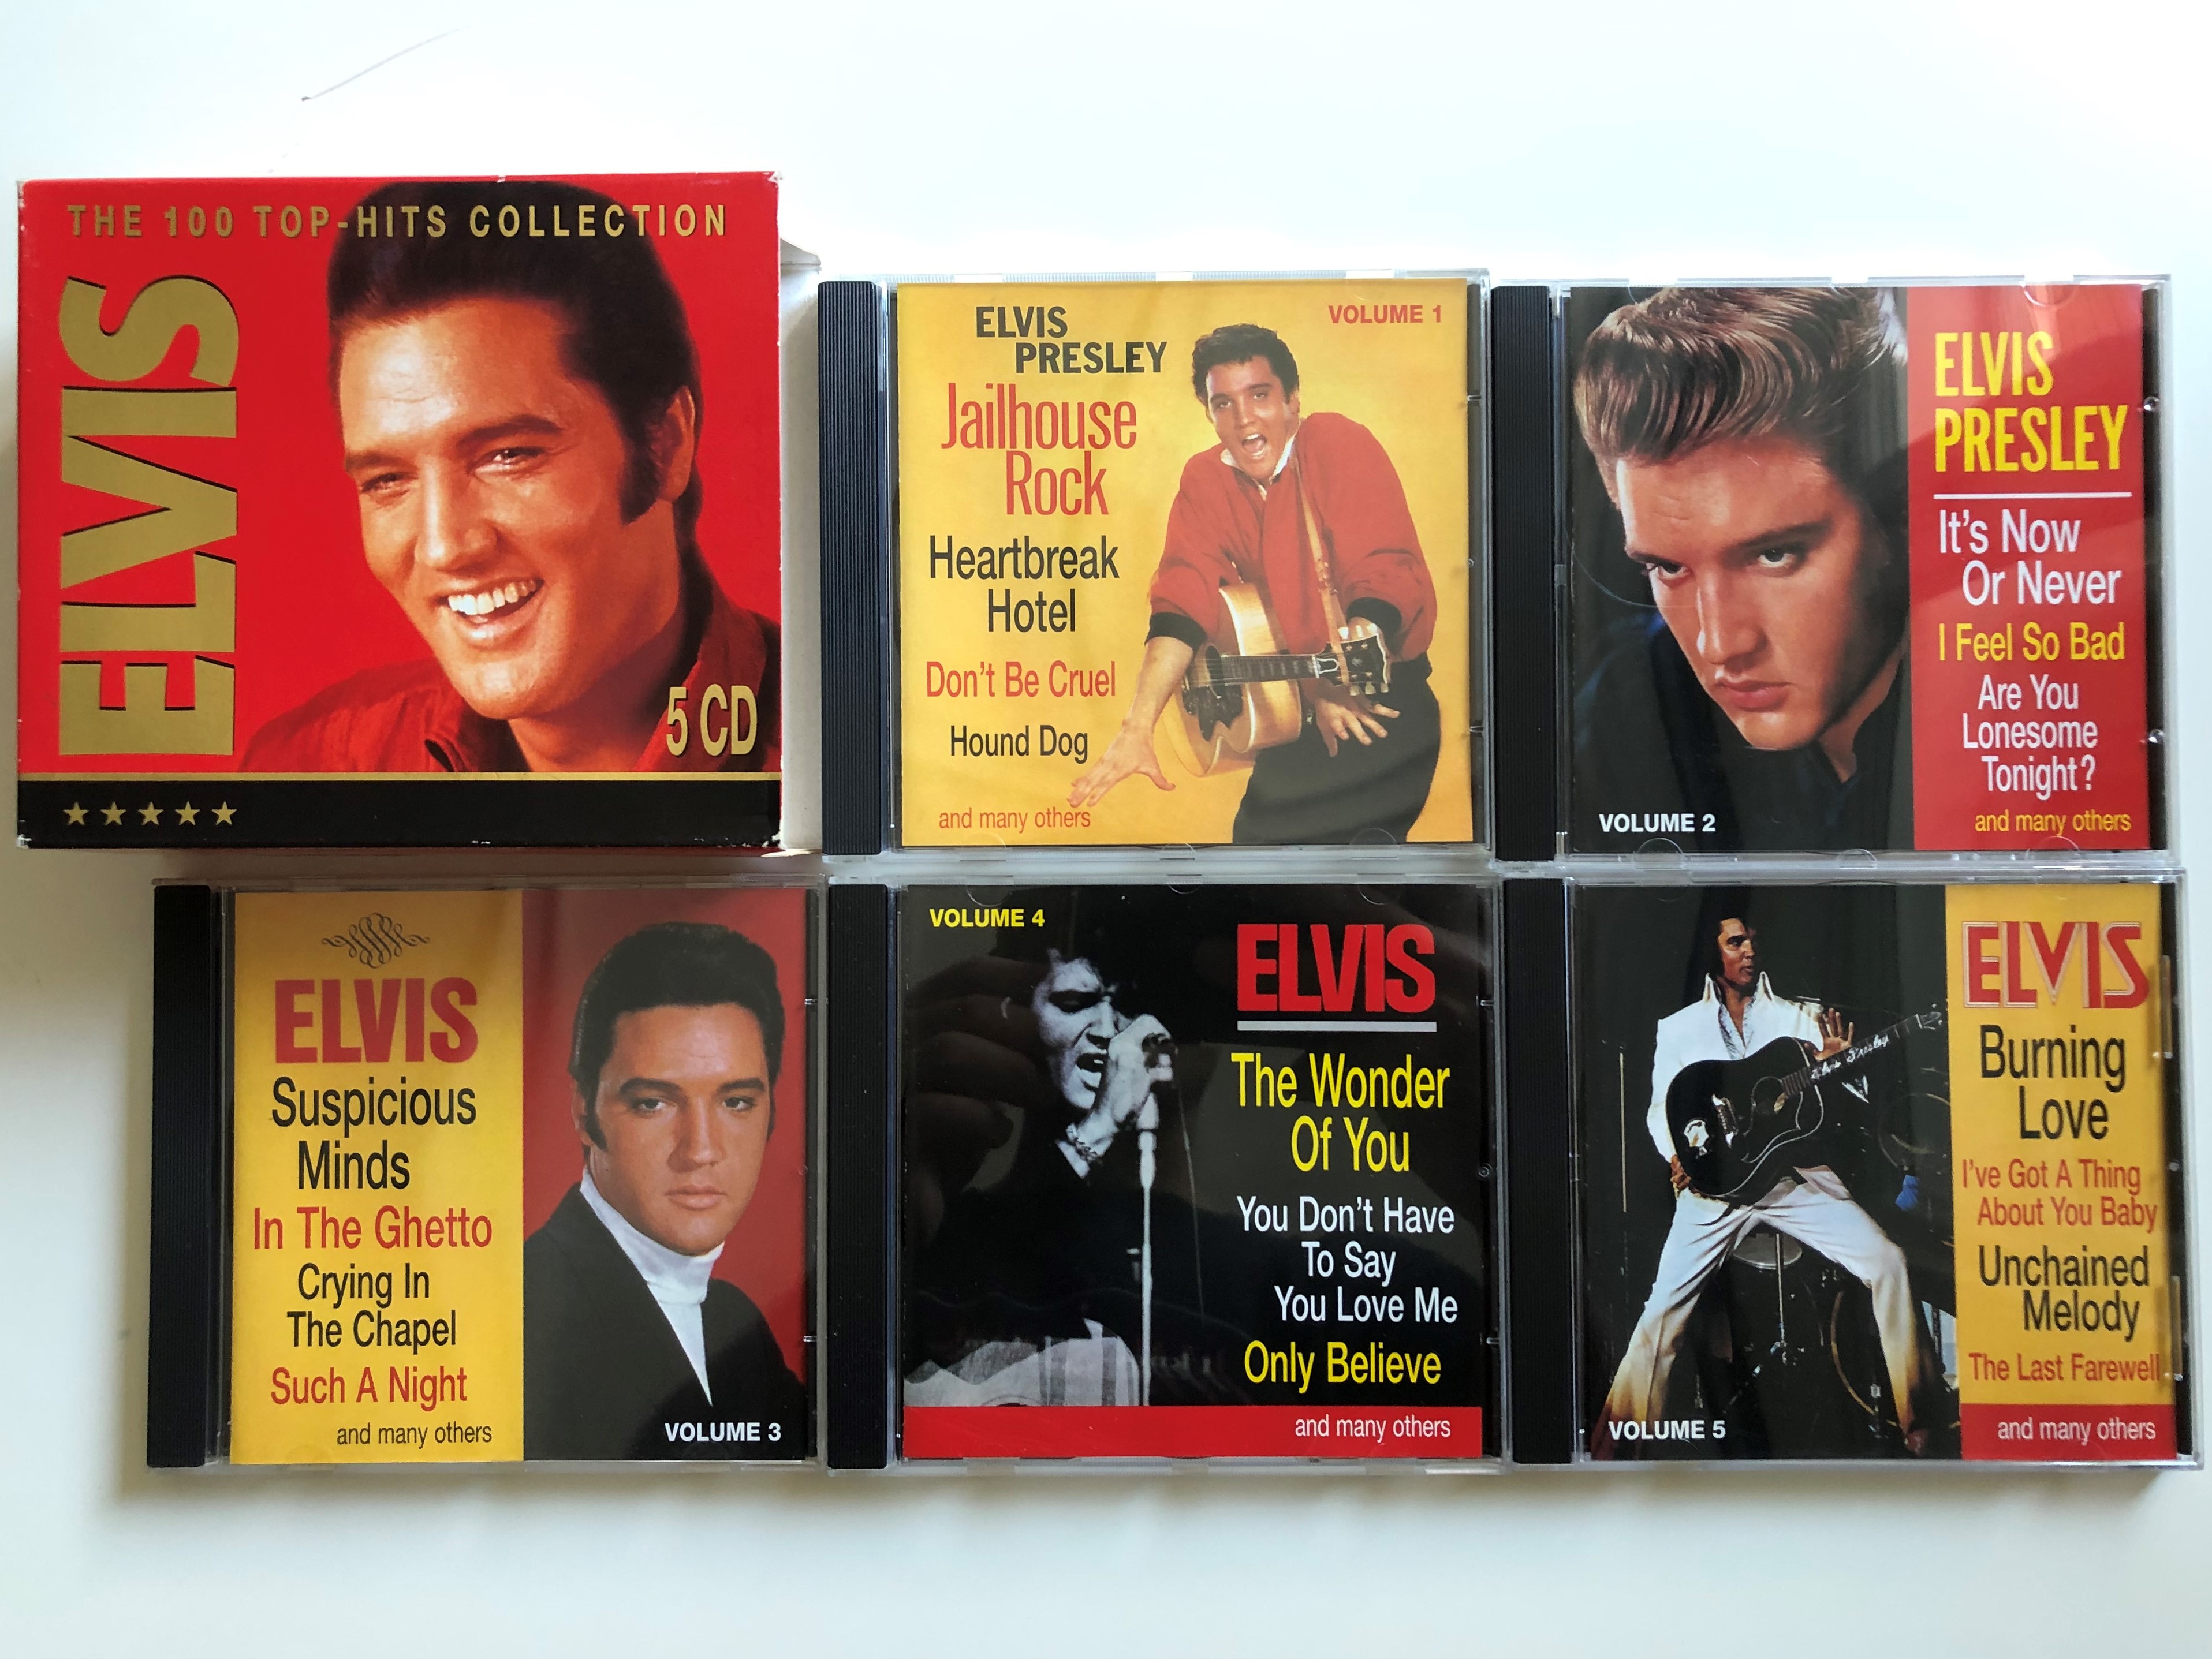 elvis-the-100-top-hits-collection-rca-5x-audio-cd-box-set-1997-stereo-36-428-1-1-.jpg